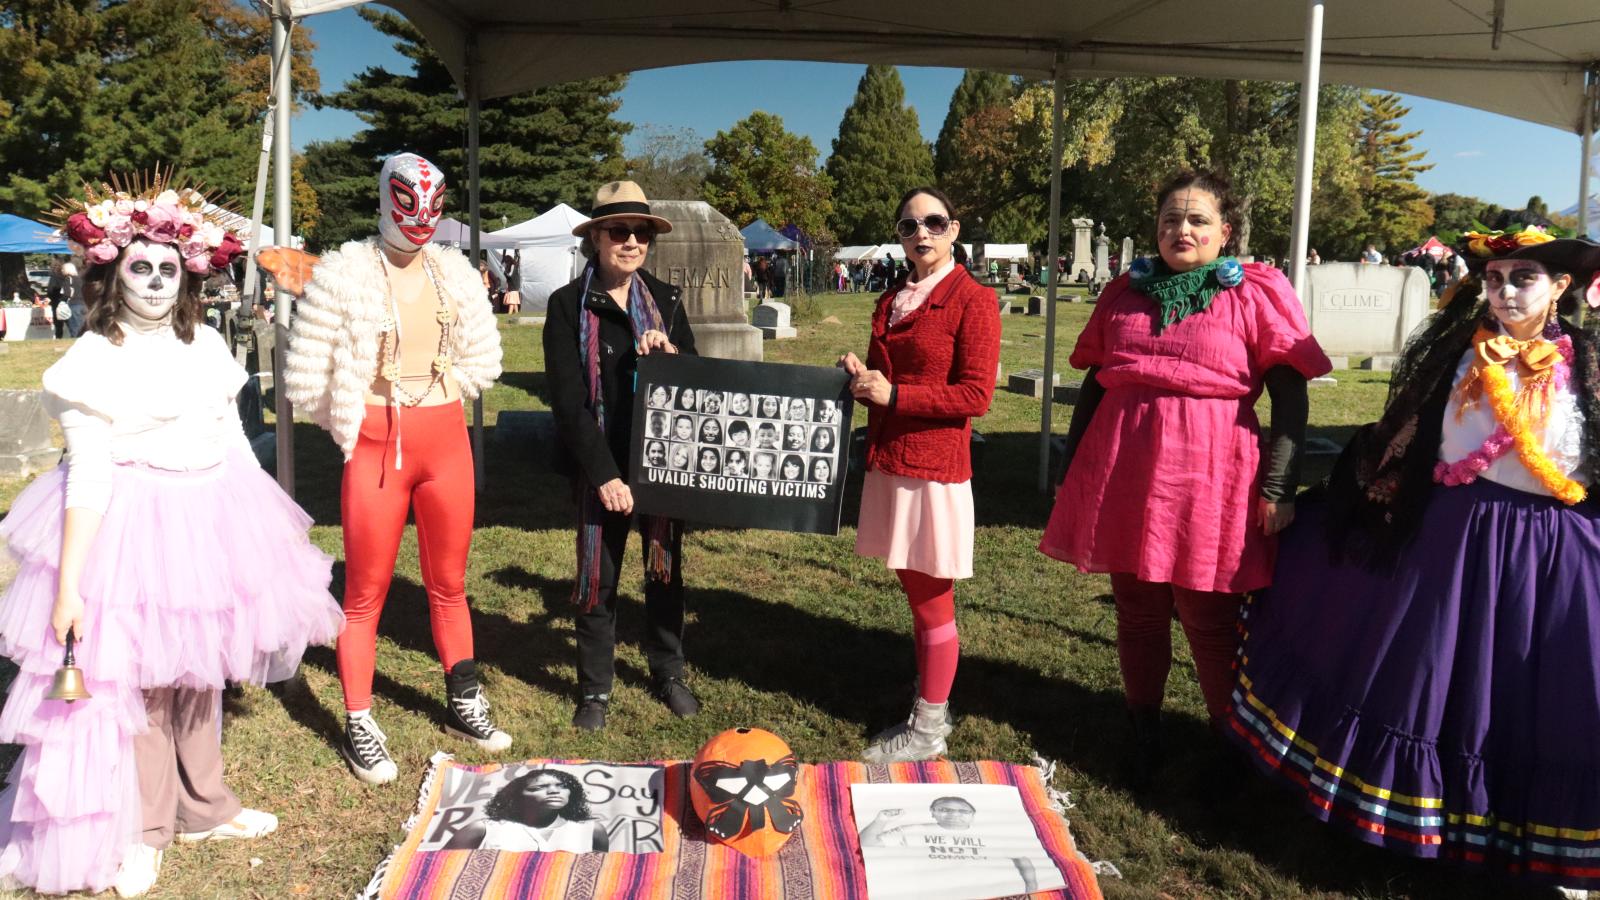 Six people standing around a picnic blanket, dressed in Day of the Dead costumes